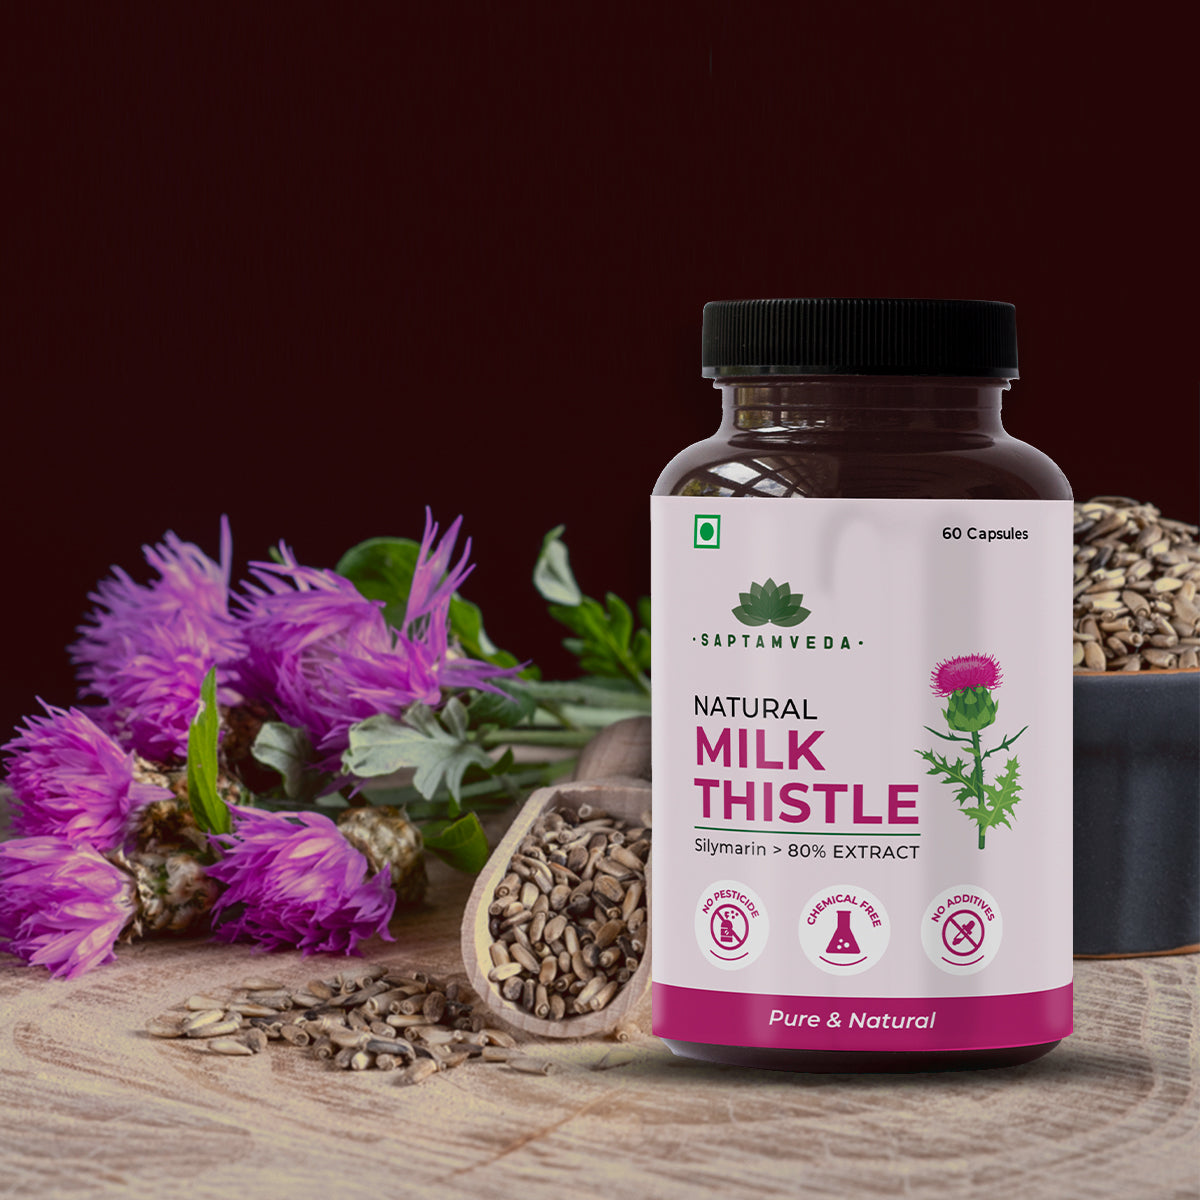 Milk Thistle Extract with 800mg of Silymarin for healthy Liver